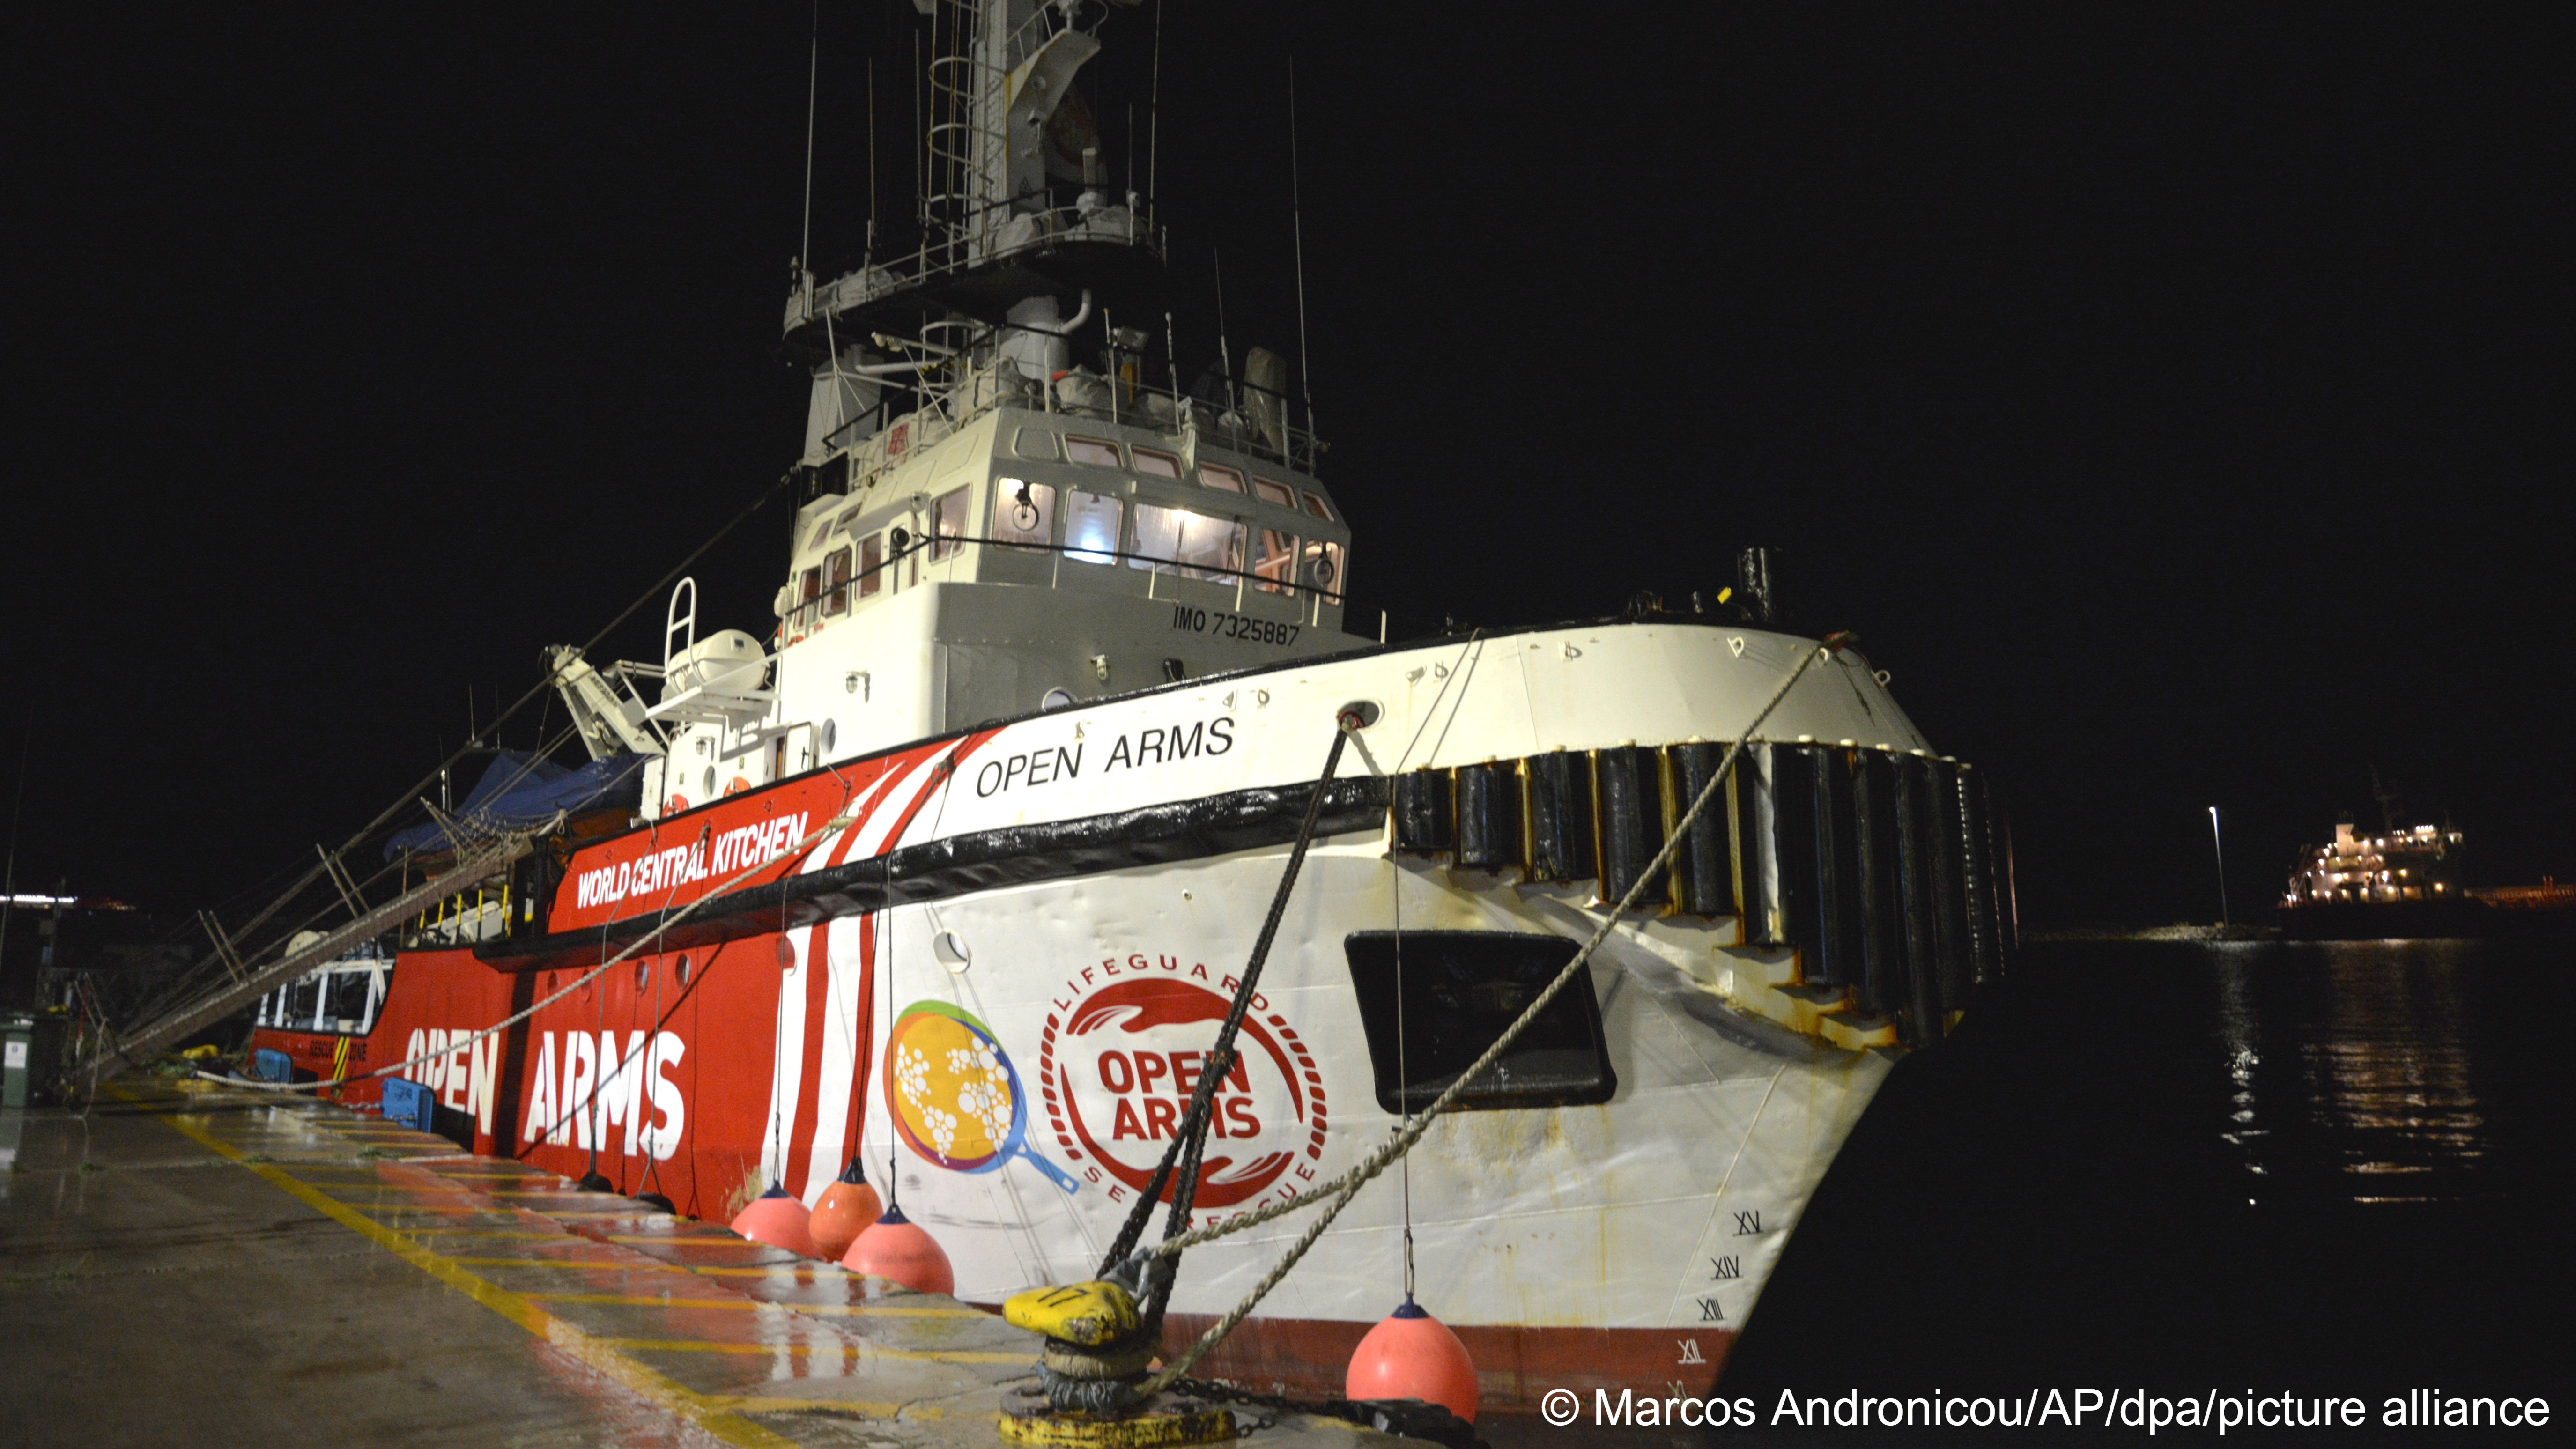 The ship belonging to the Spanish NGO Open Arms is docked in the port of Larnaca, Cyprus at night